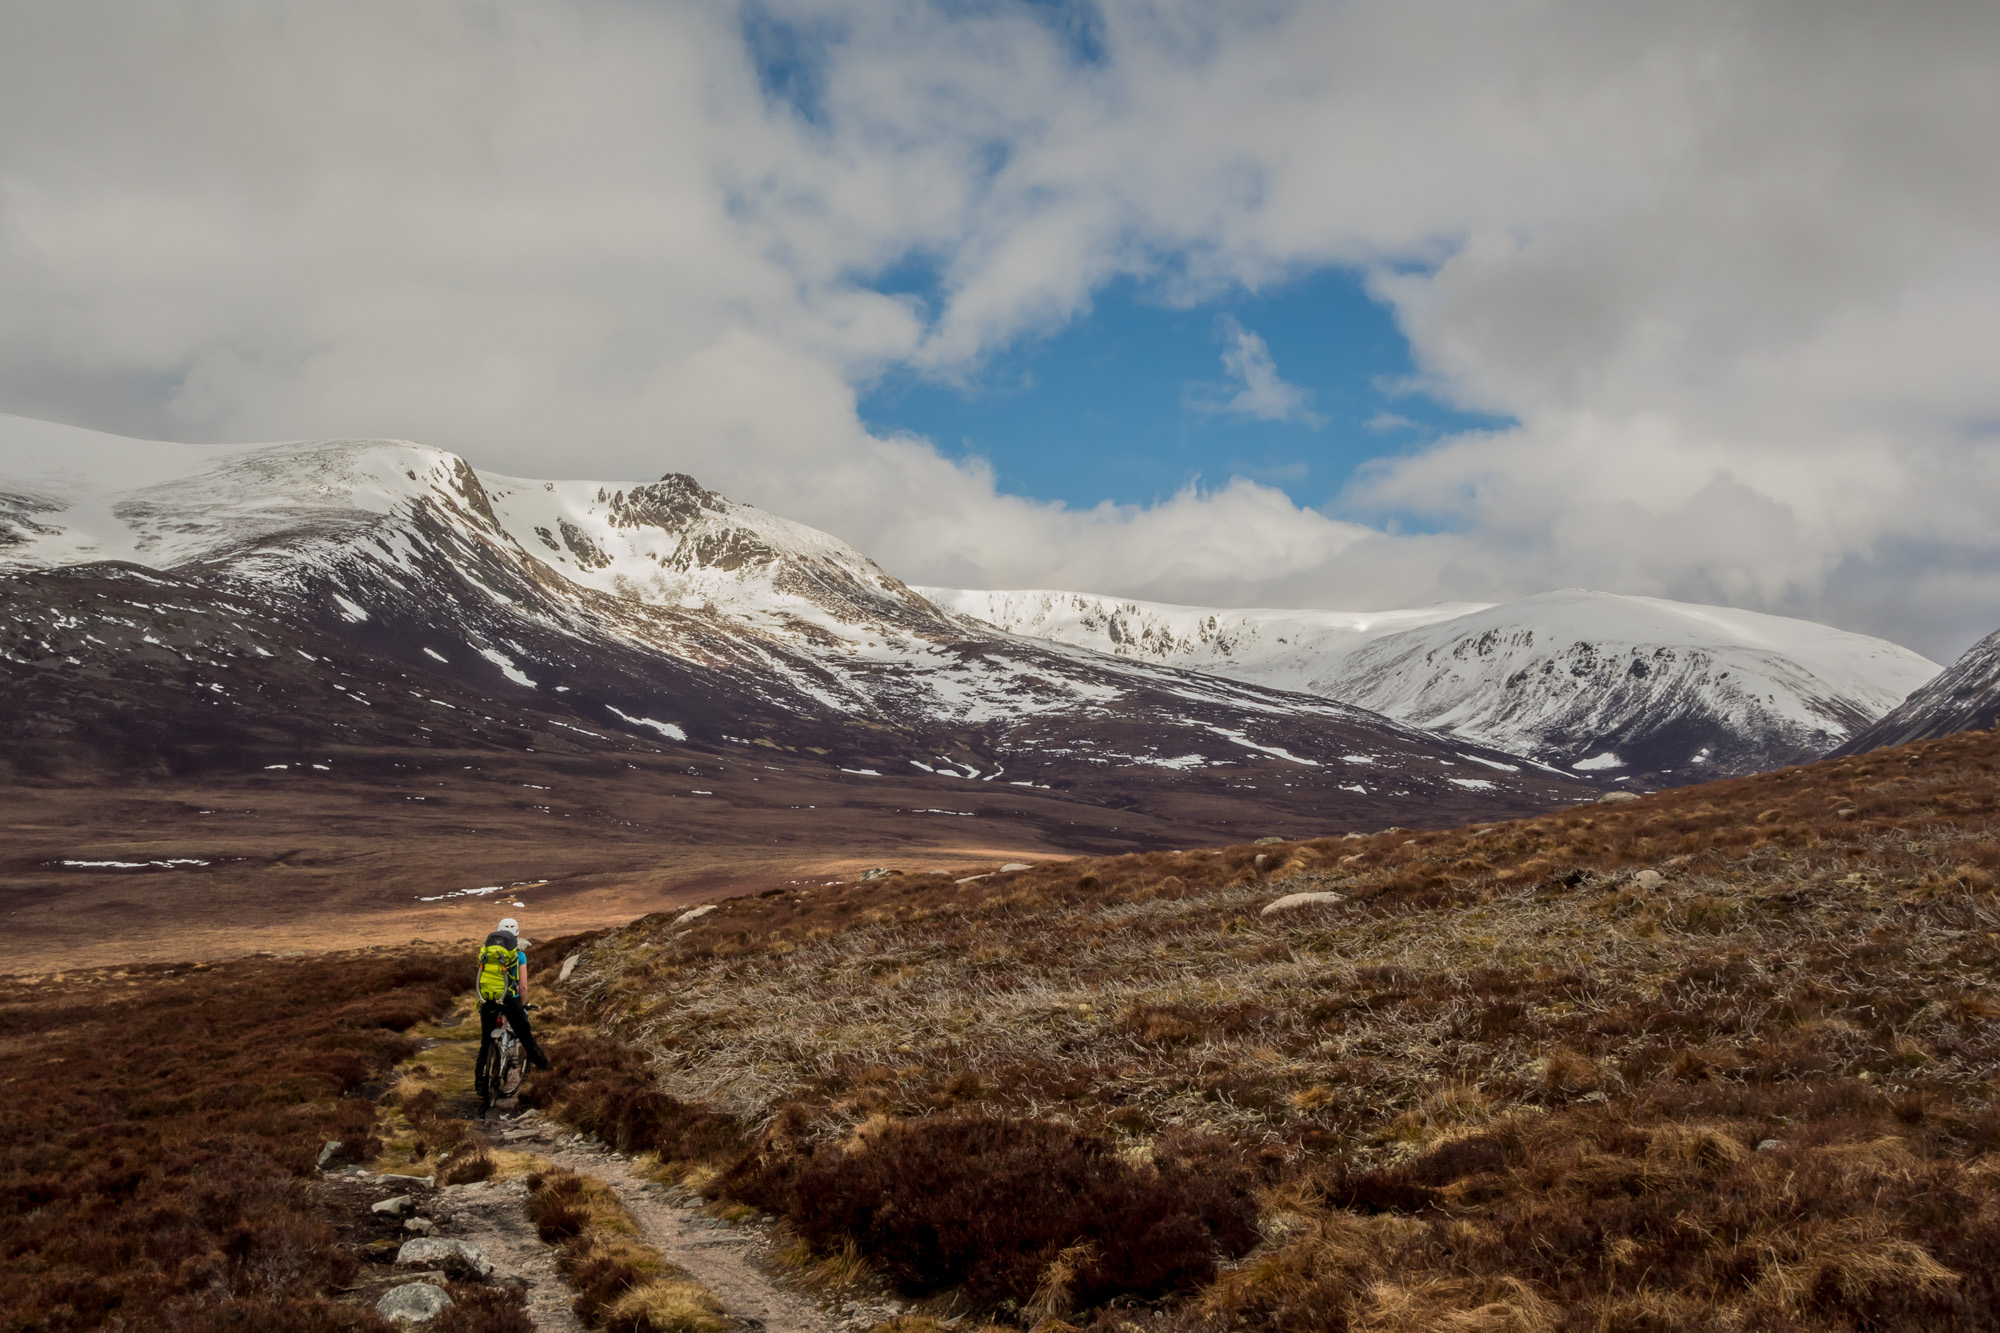 Further up the trail and the vast coire system begins to reveal itself